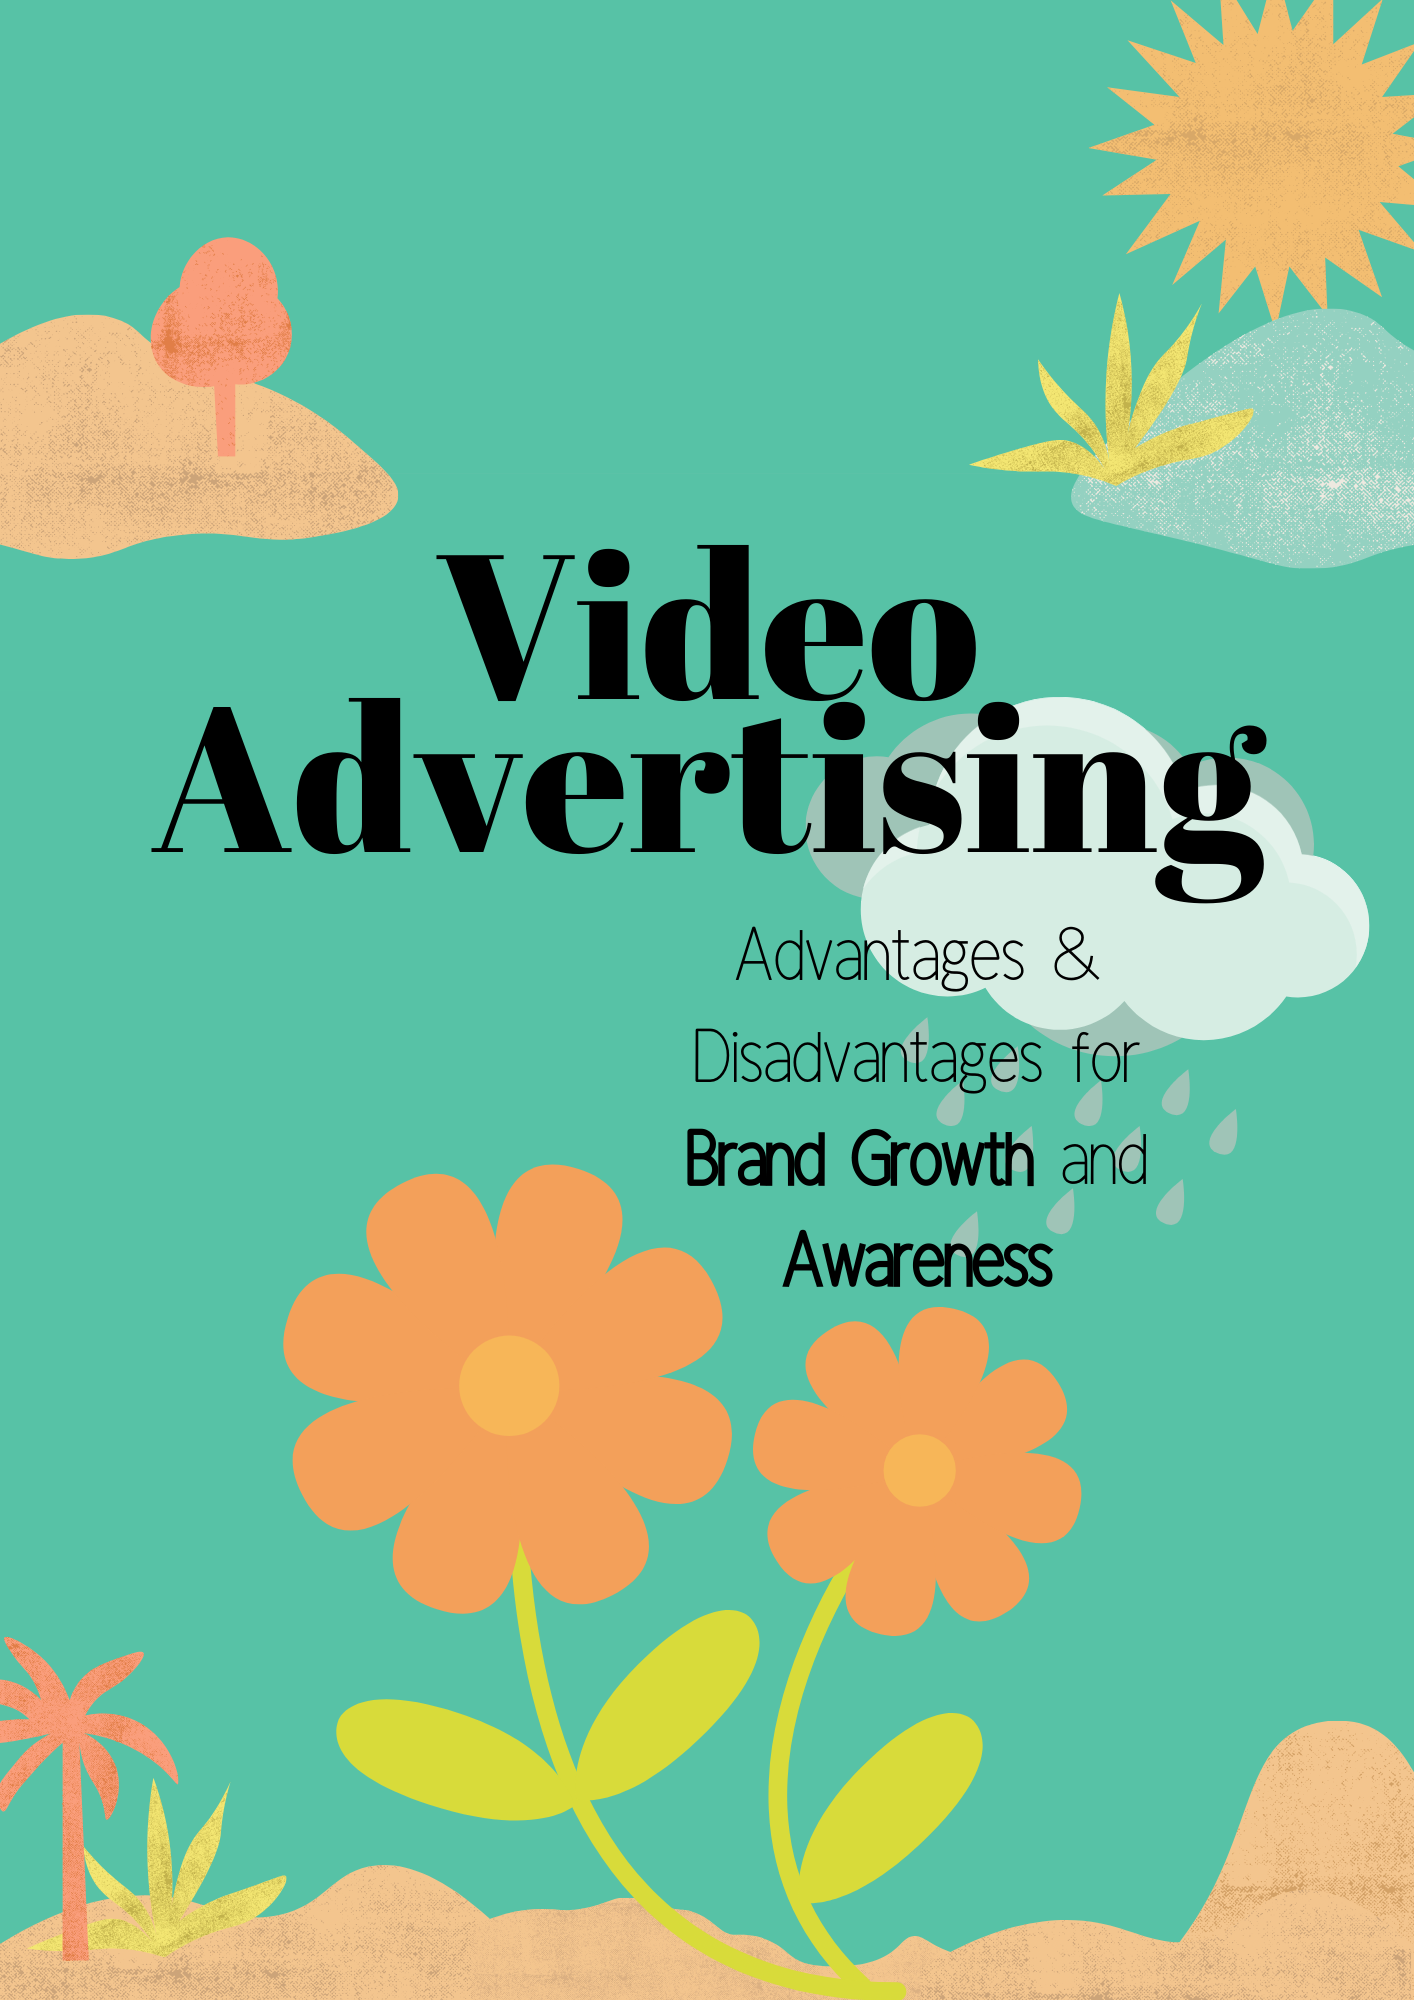 Video advertising: Advantages and disadvantages for brand growth and awareness